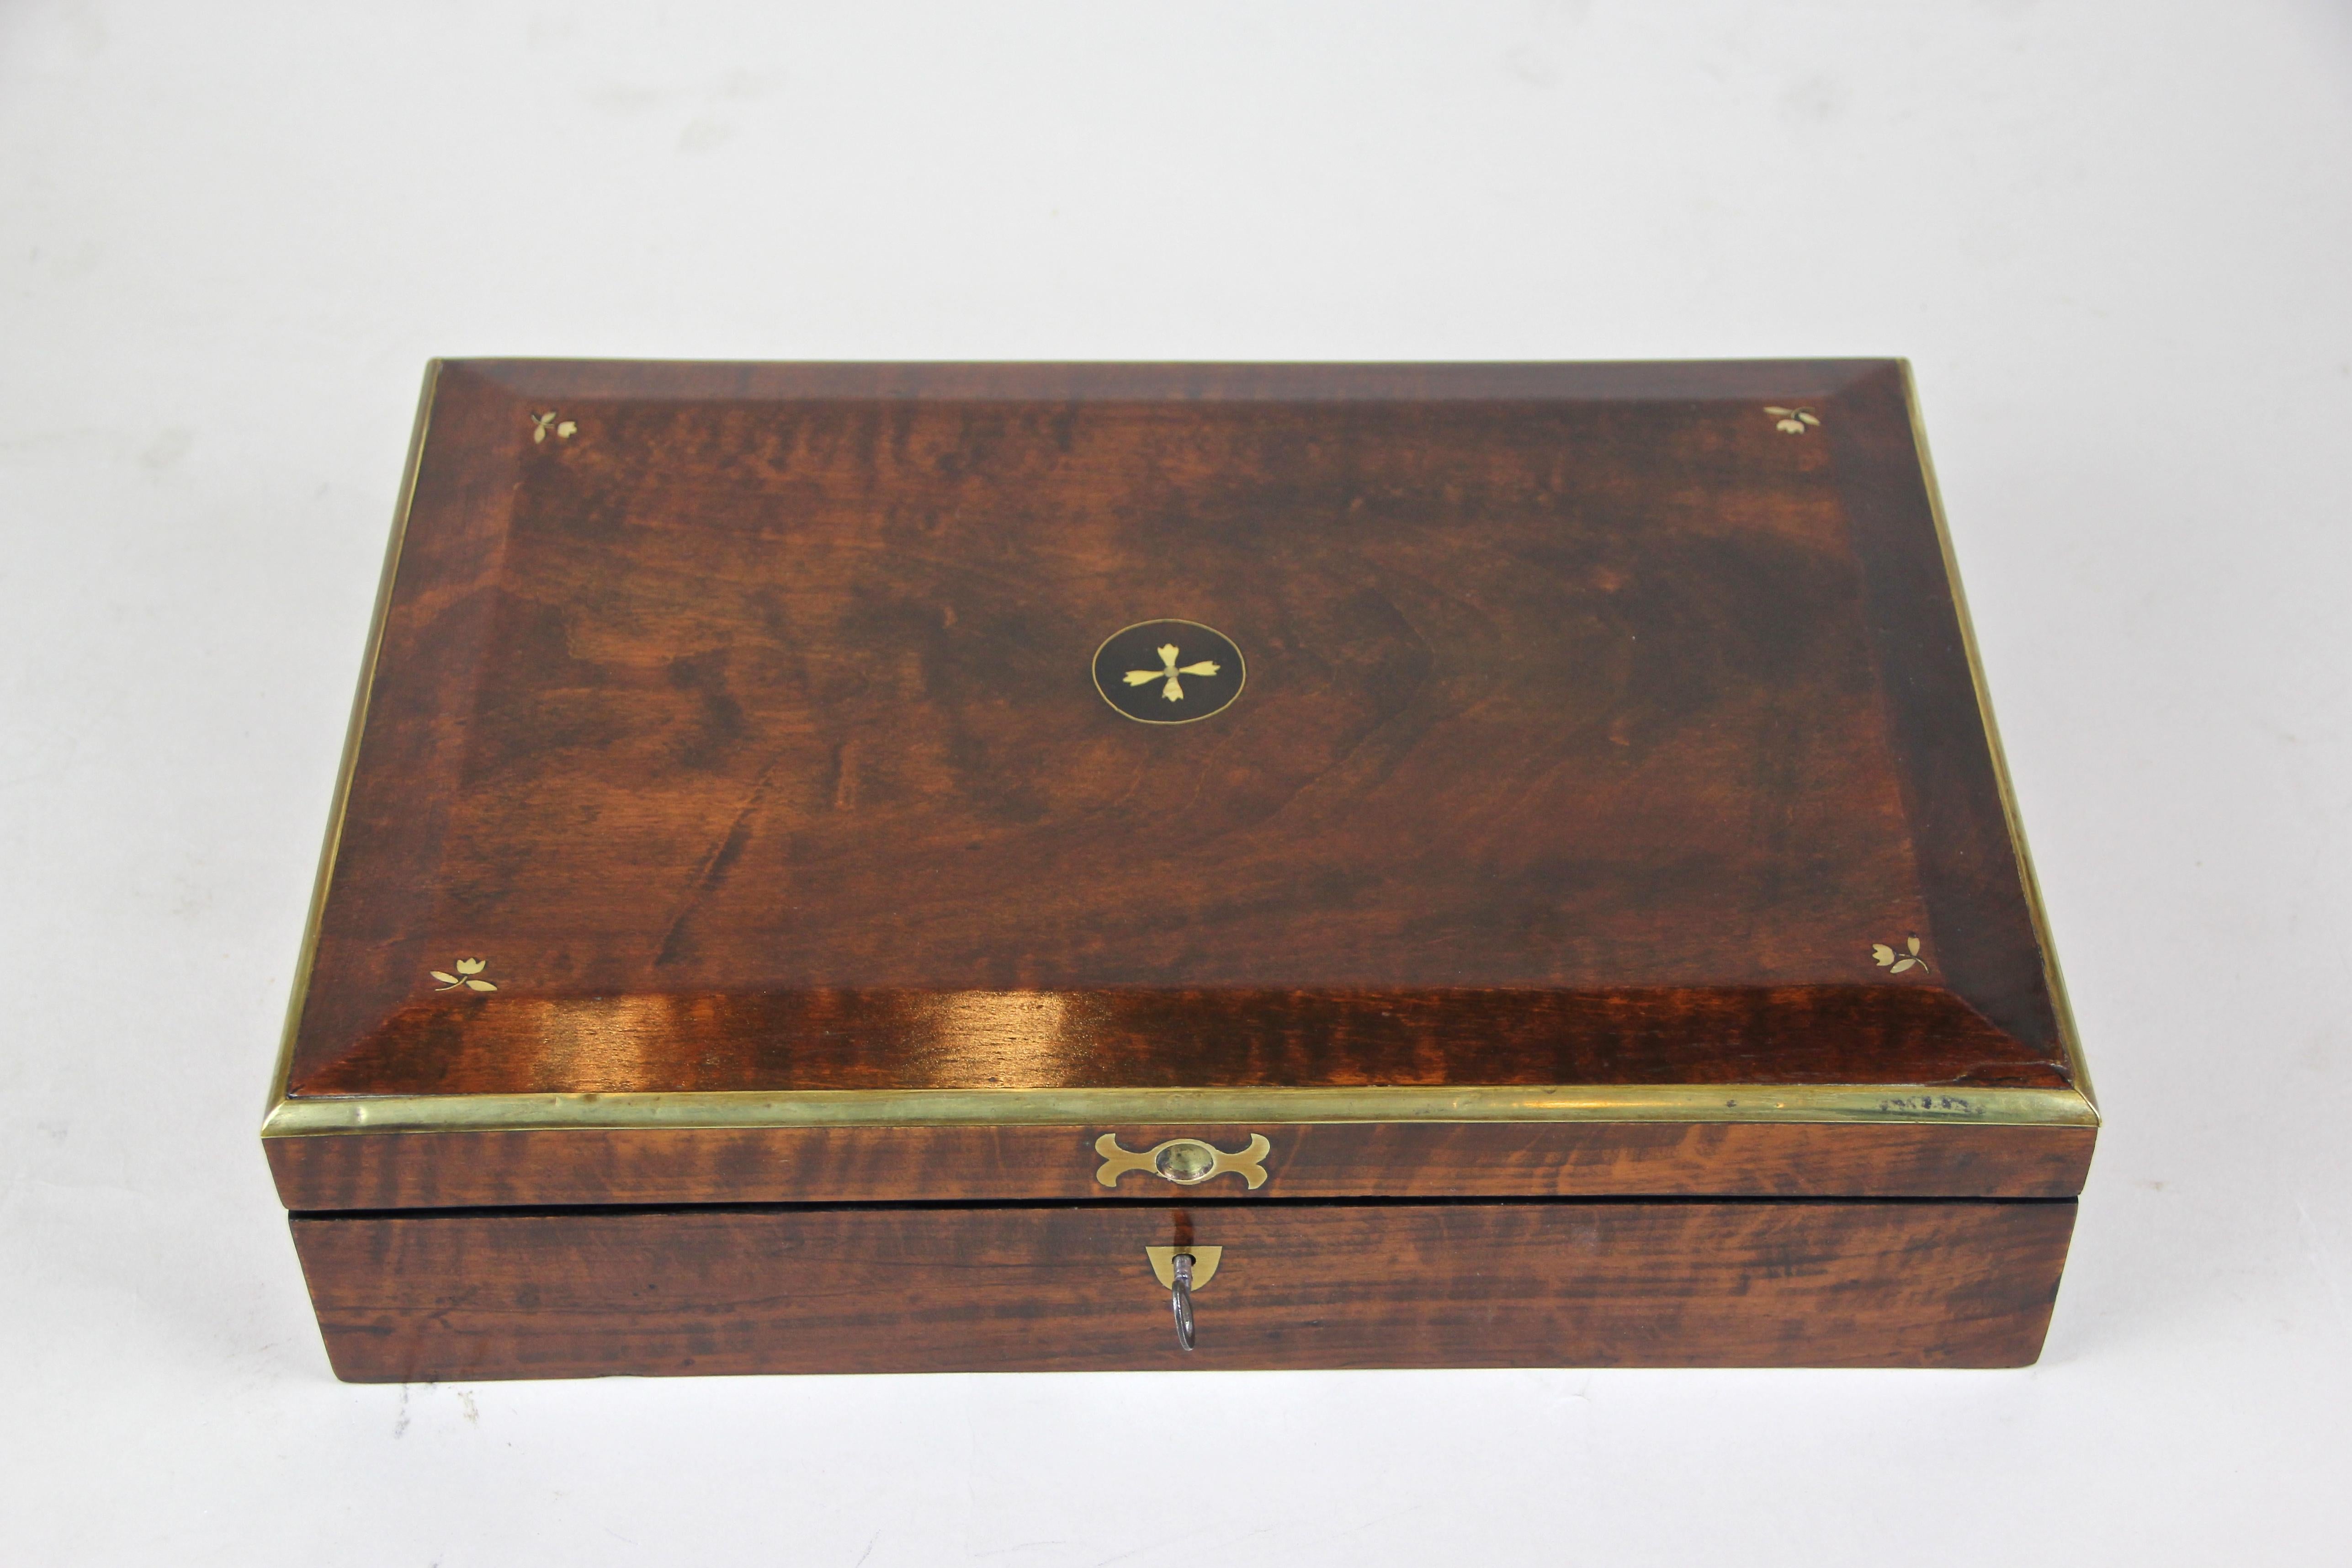 Precious Biedermeier wooden box out of Vienna/ Austria, circa 1830. This enchanting nut wood veneered box comes with wonderful brass framed edges on the lid, where you can also find beautiful small mother of pearl inlayed flowers. With an age over